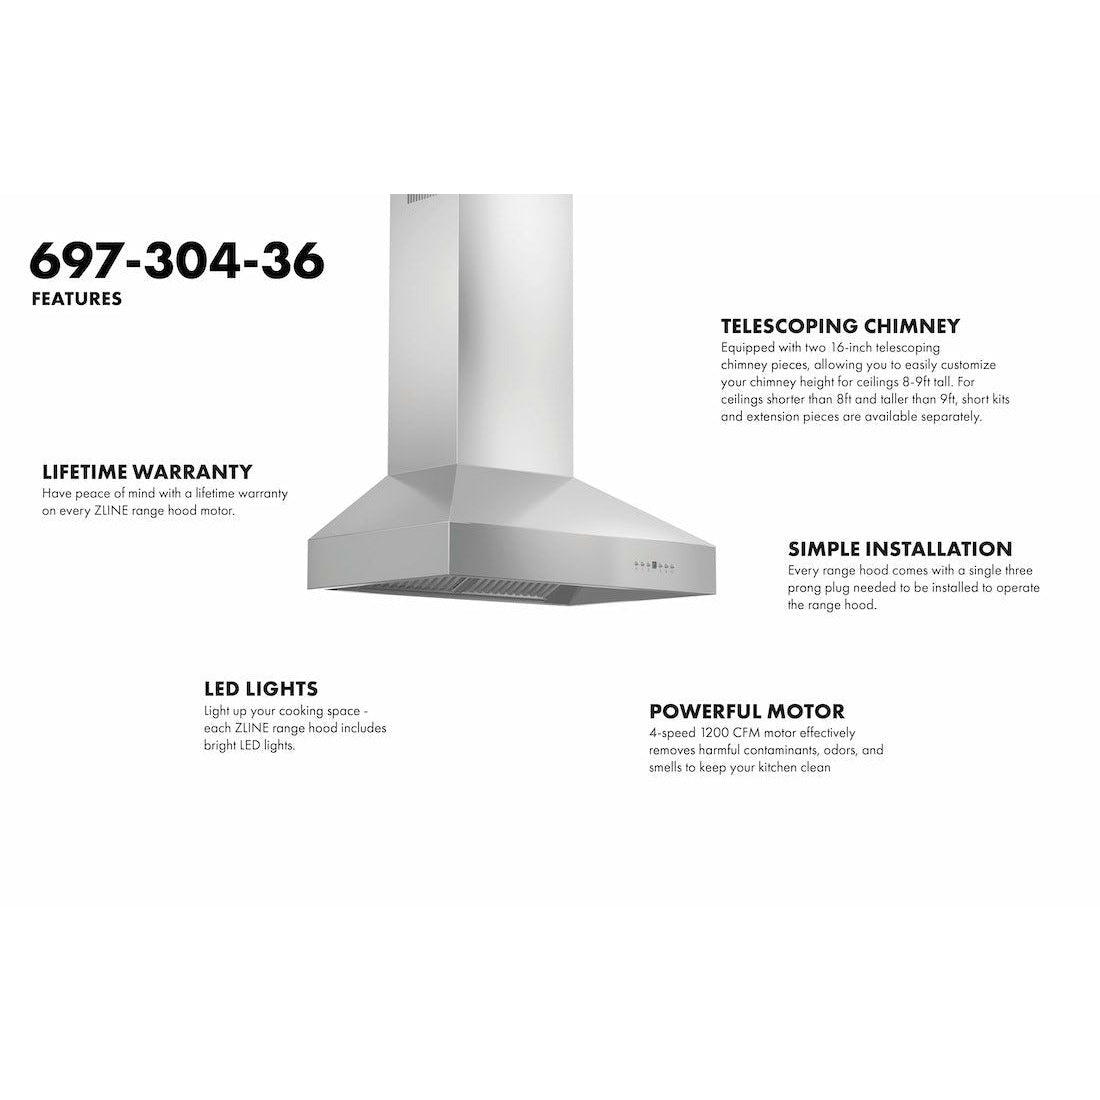 ZLINE Ducted Wall Mount Range Hood in Outdoor Approved Stainless Steel - 697-304